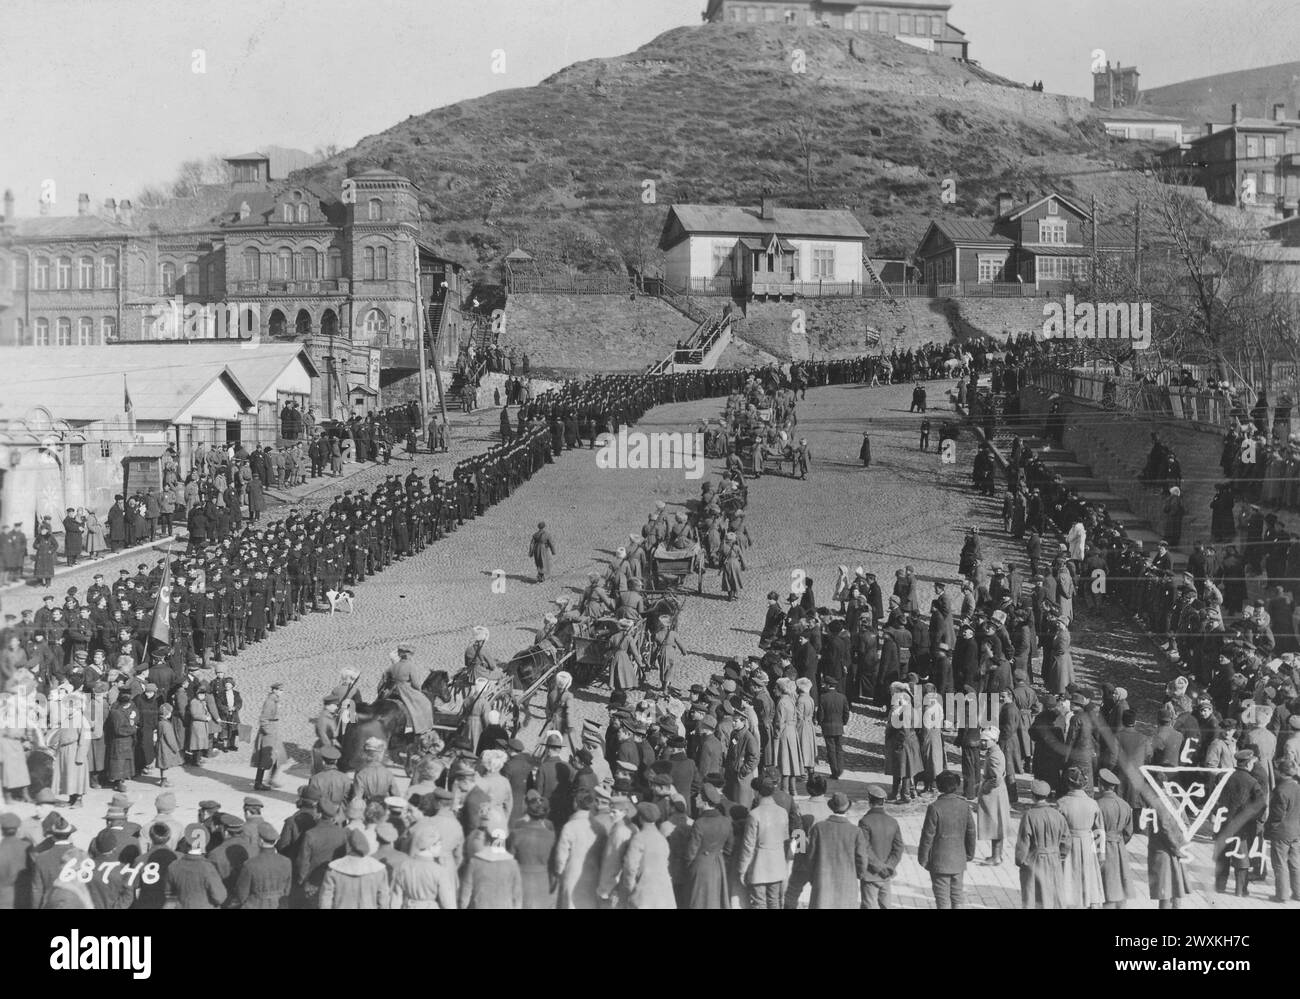 TROOPS MASSED IN FRONT OF Russian Cathedral, preparatory to parade. Vladivostok, Siberia ca. March 1920 Stock Photo